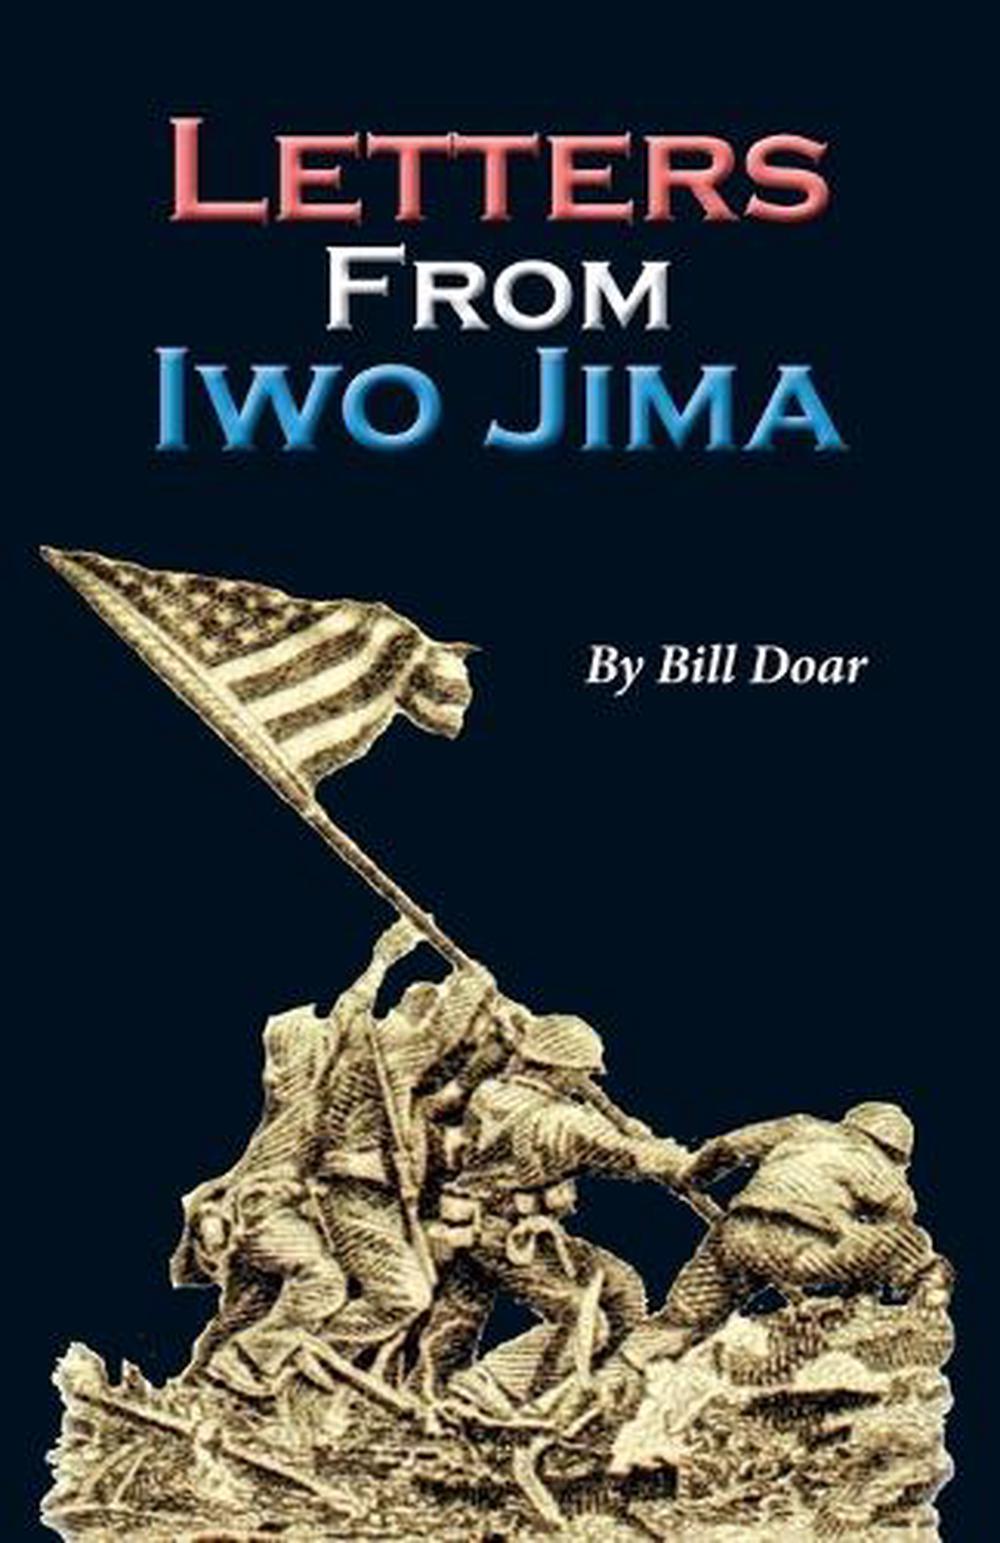 letters from iwo jima free download